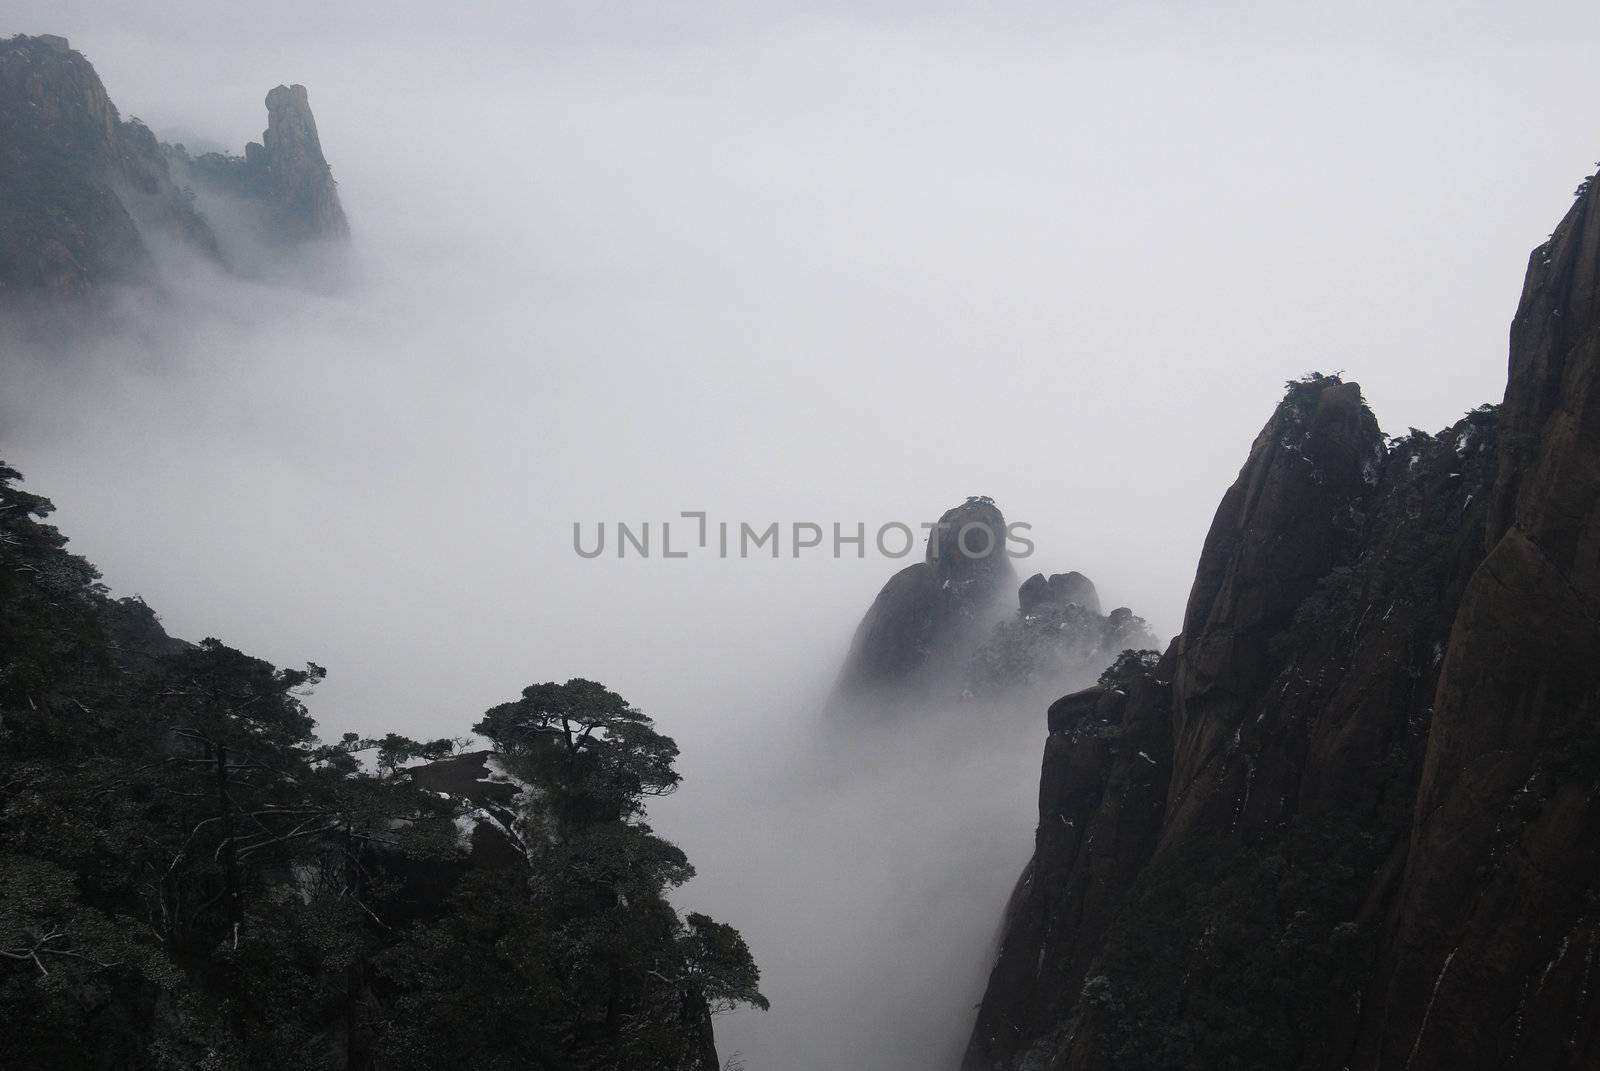 The cloud and mist of Sanqingshan mountai by xfdly5